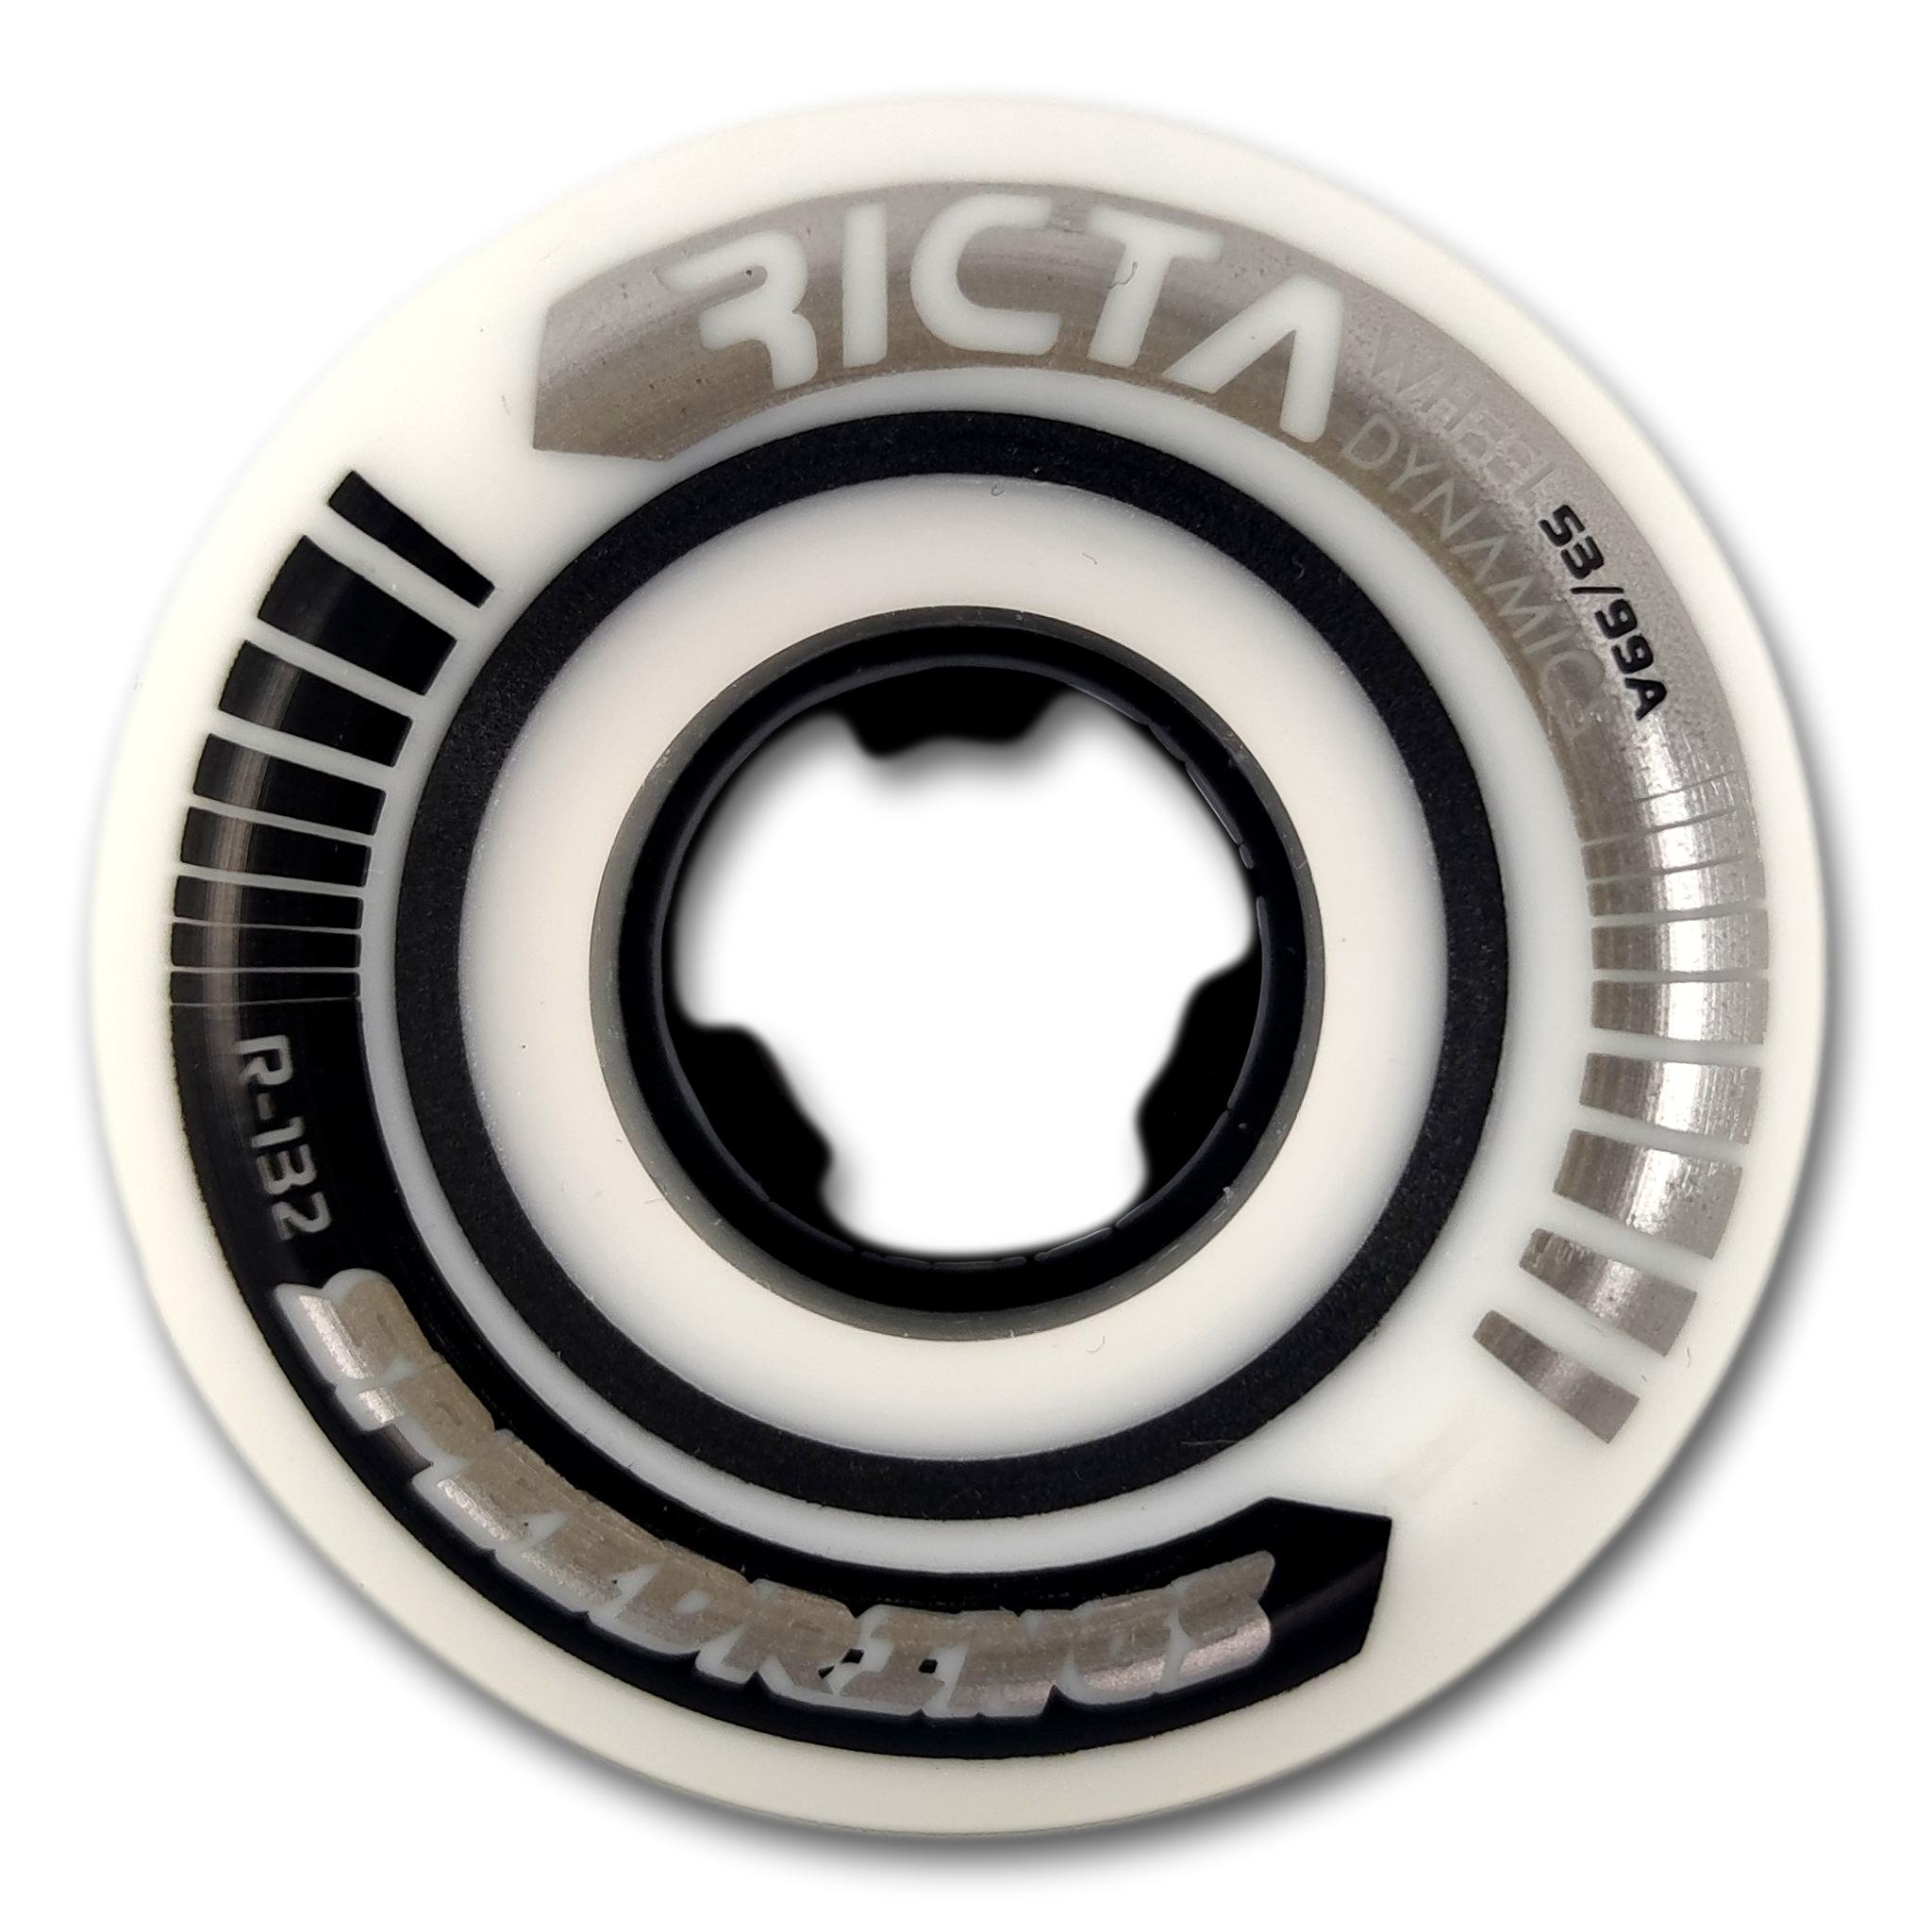 Ricta Wide Speed Rings Wheels 53mm 99A